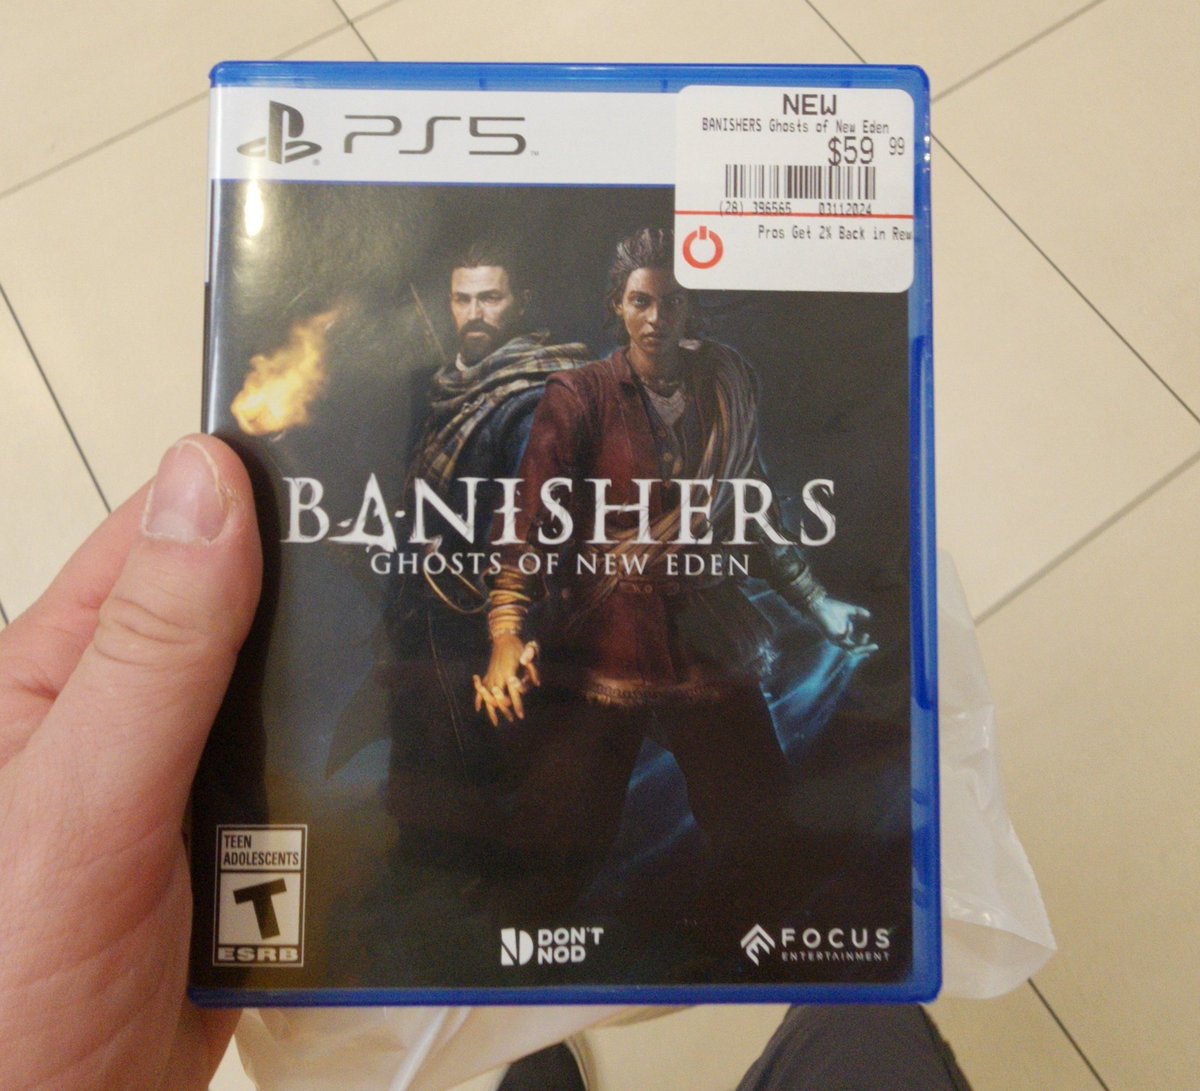 After grinding two jobs, I felt to treat myself!

Fucking hyped!

#BanishersGhostsofNewEden